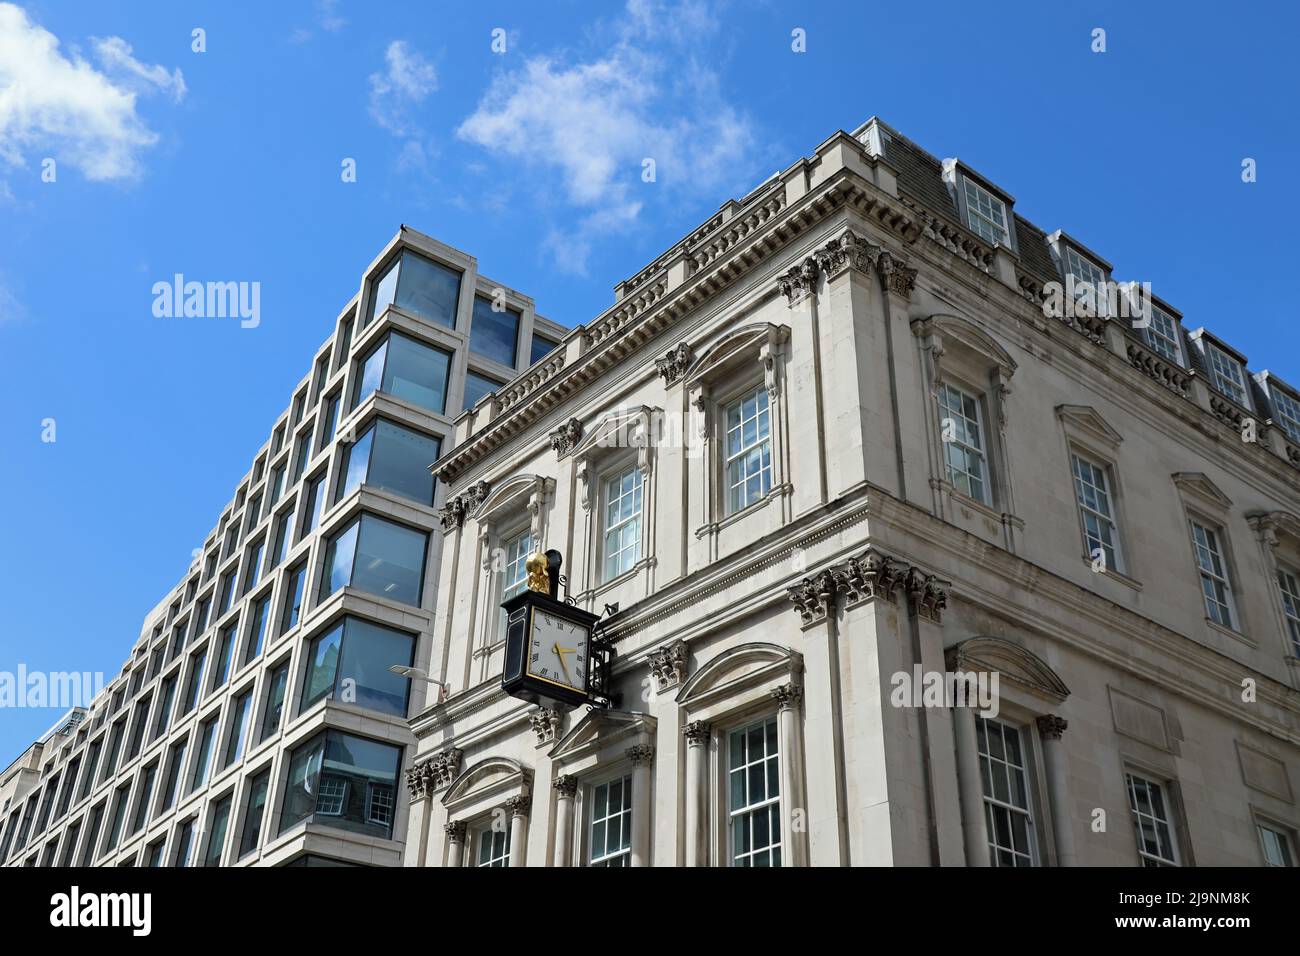 Atlas House at Cheapside in the City of London Stock Photo